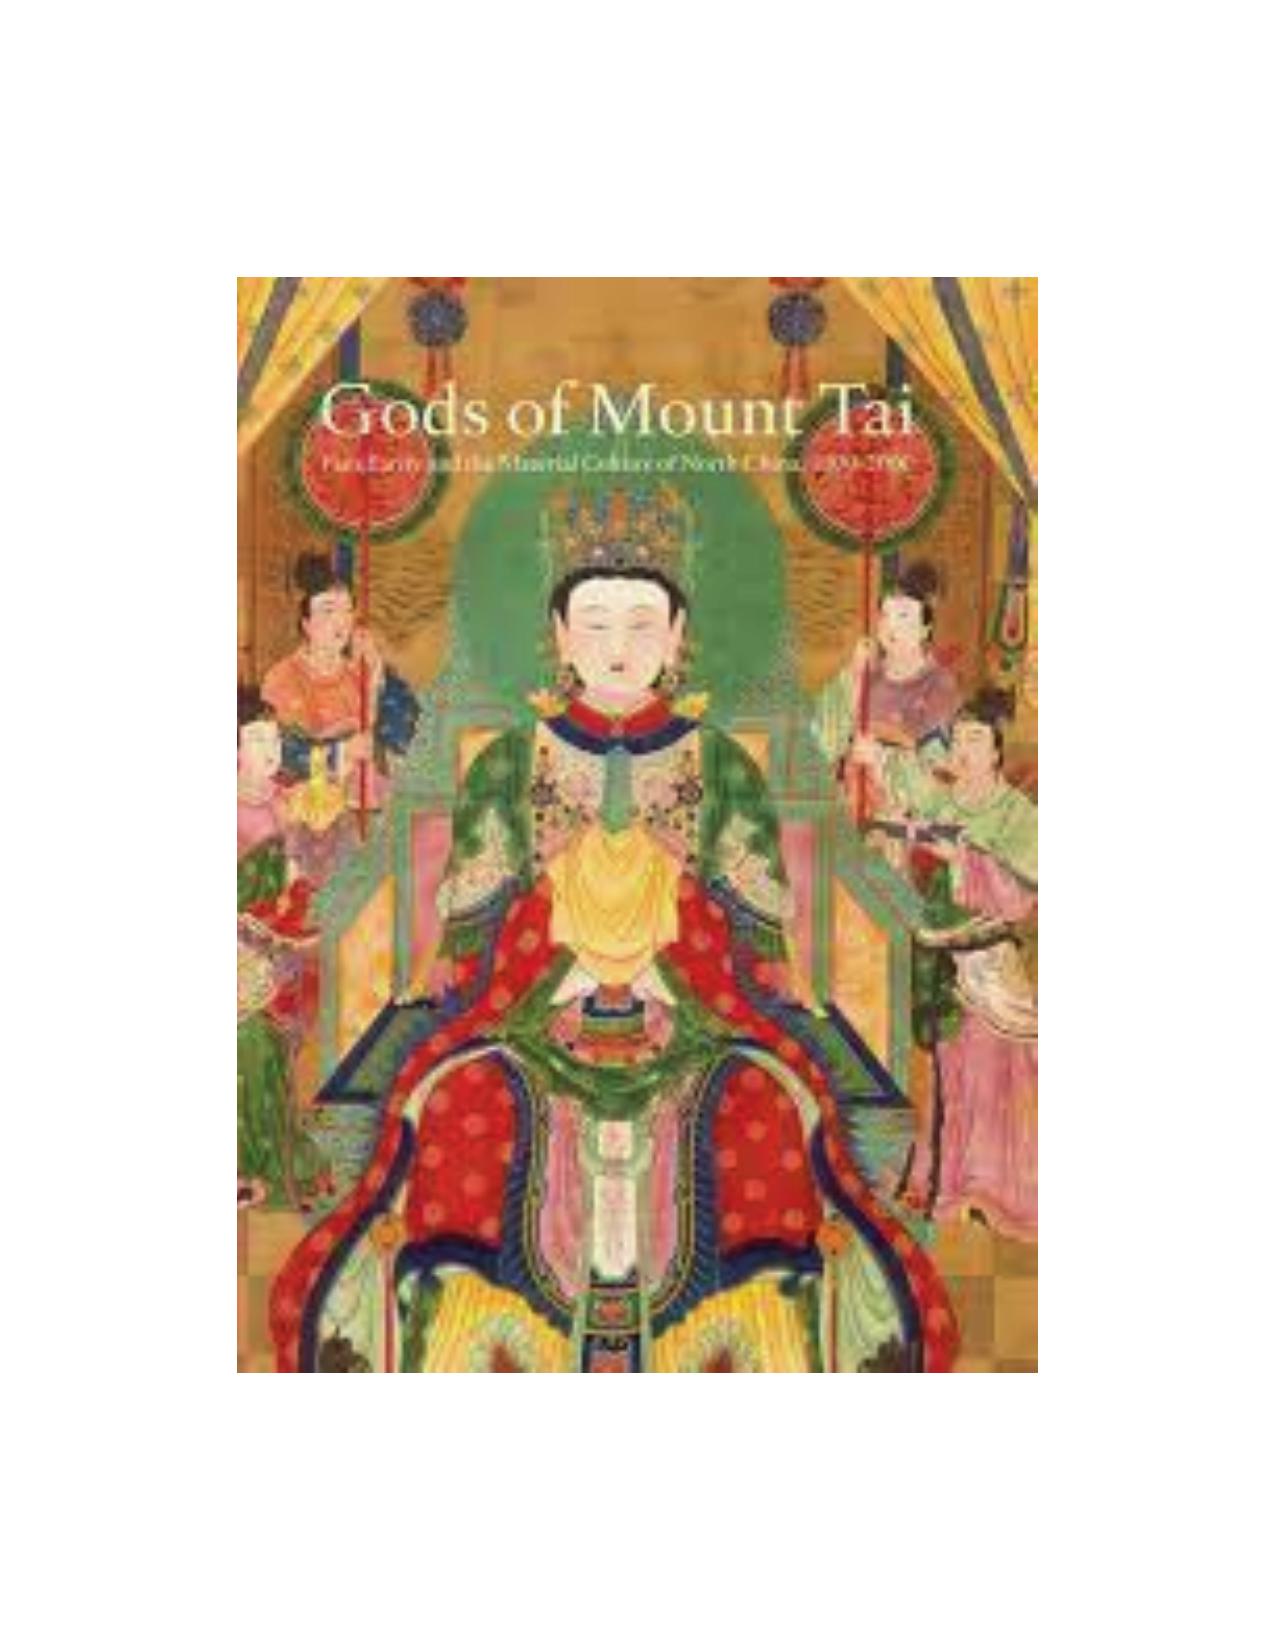 Gods of Mount Tai Familiarity and the Material Culture of North China, 1000-2000 by Susan Naquin